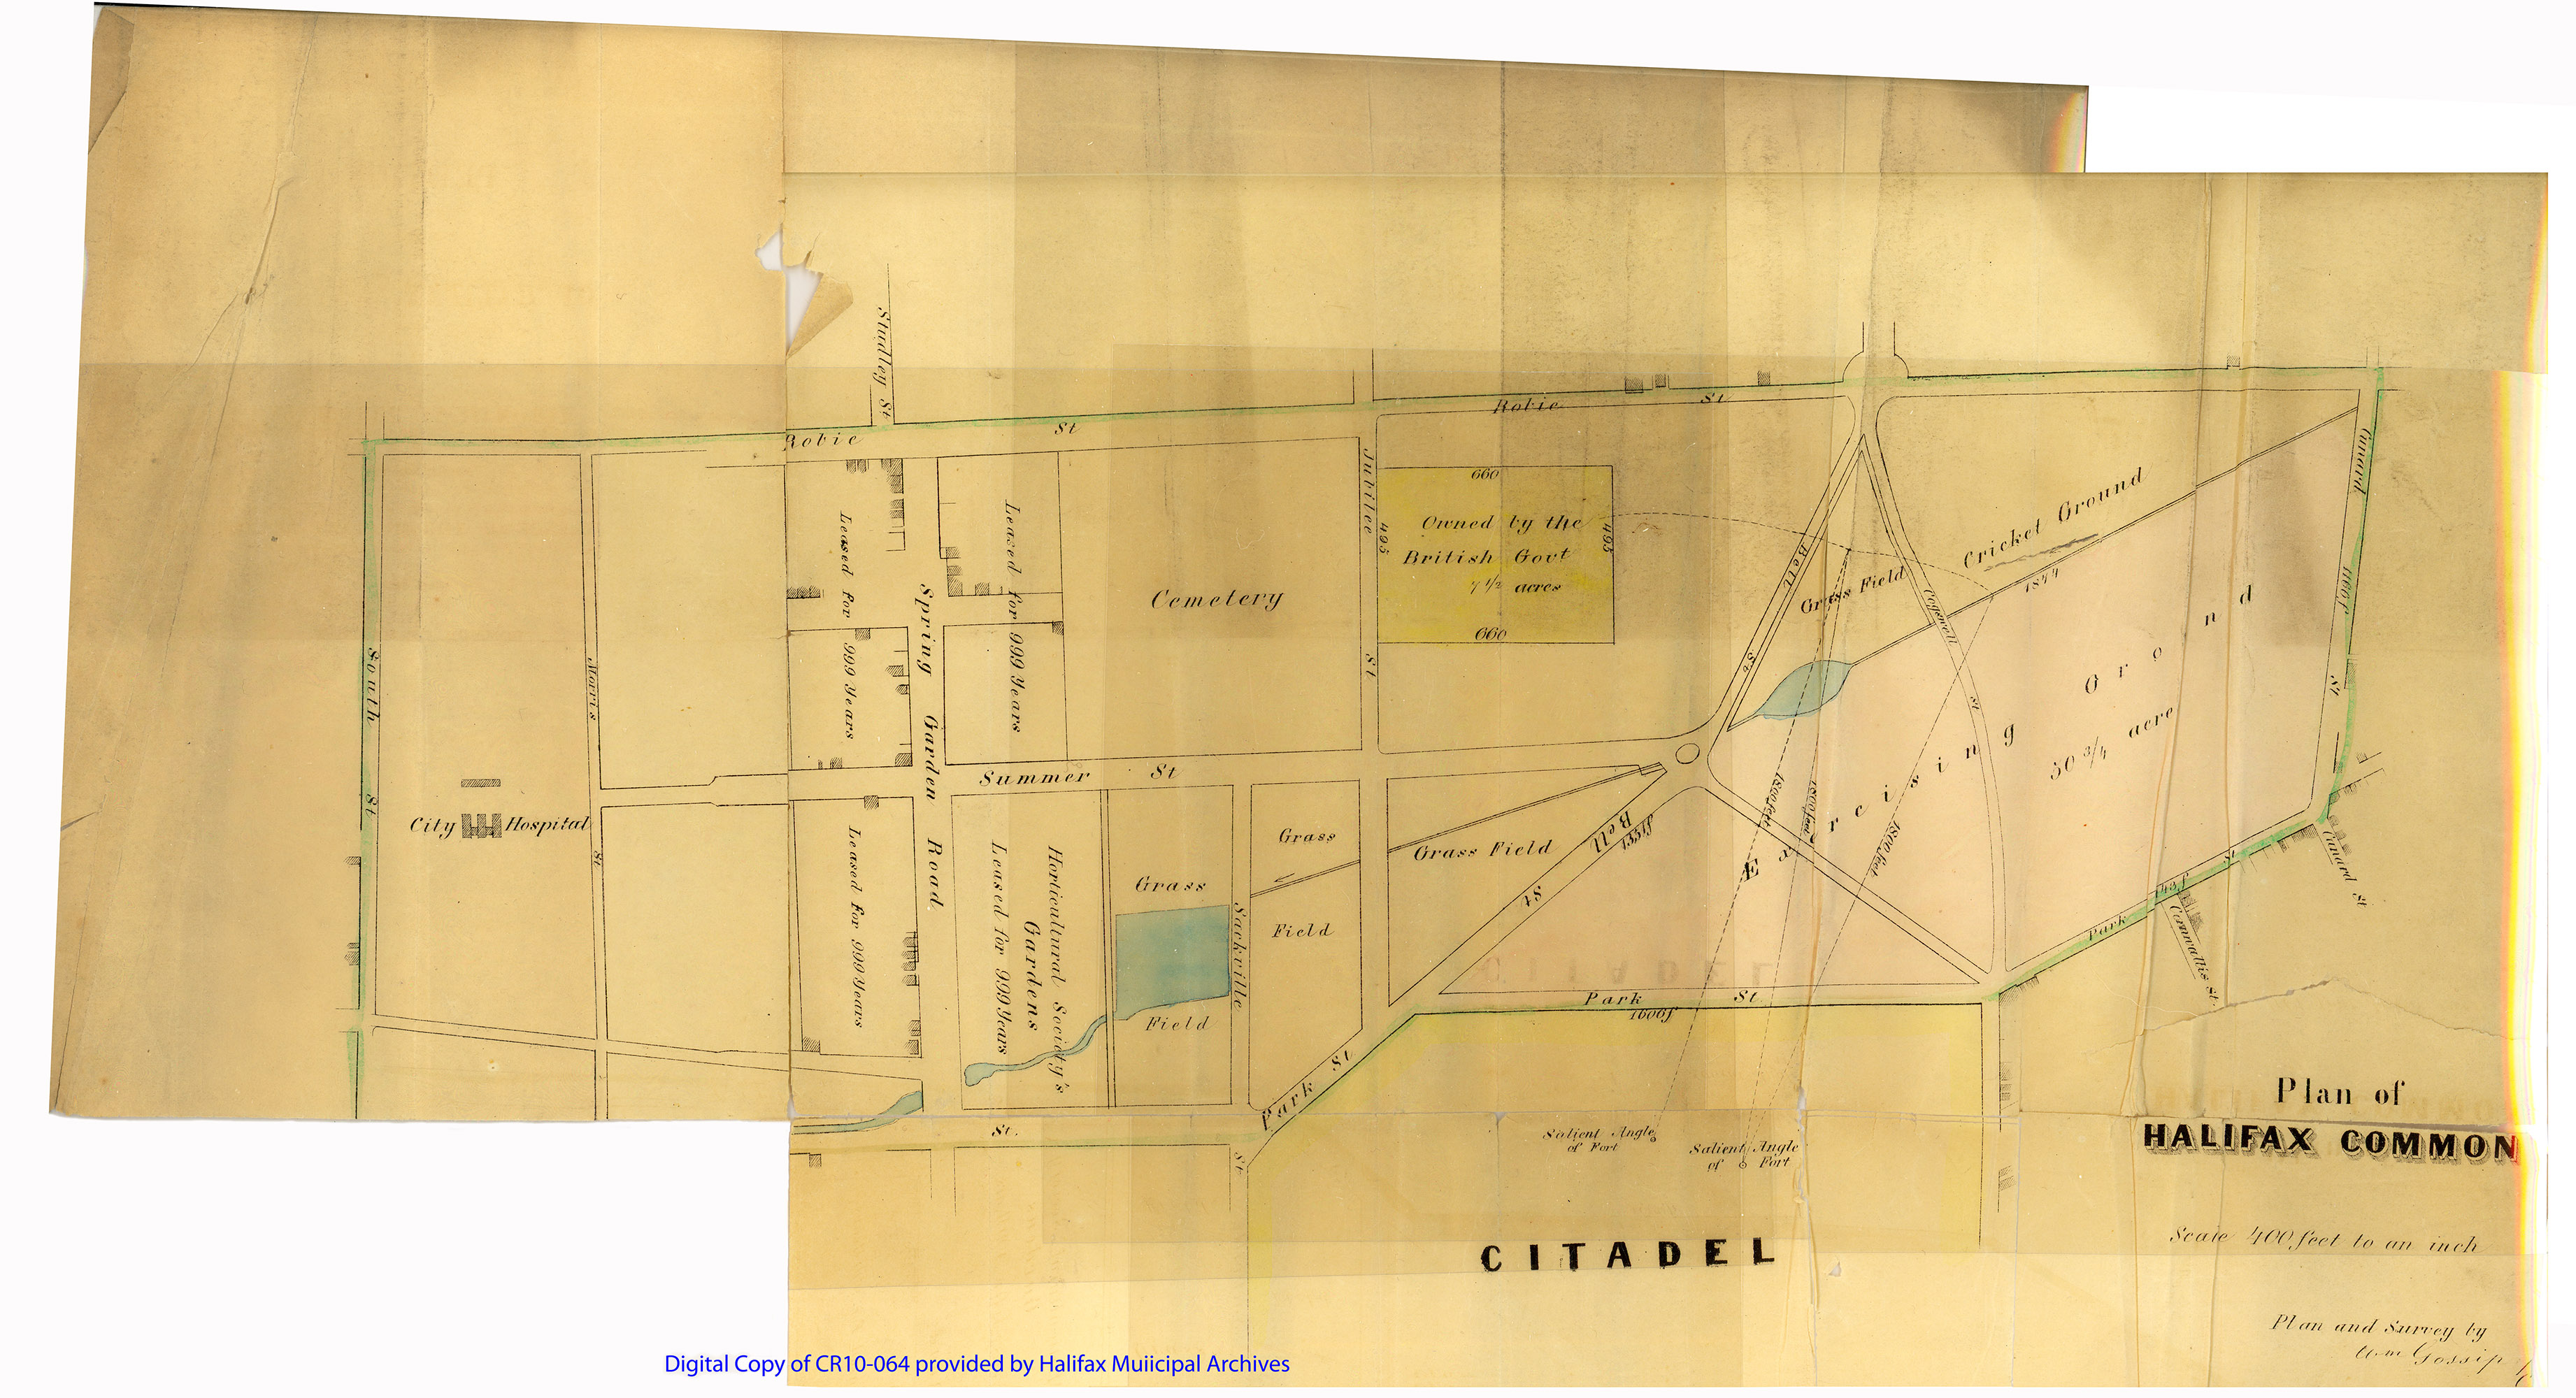 Digital copy of plan of Halifax Common showing its boundaries between Robie, Cunard, Park and South Streets.